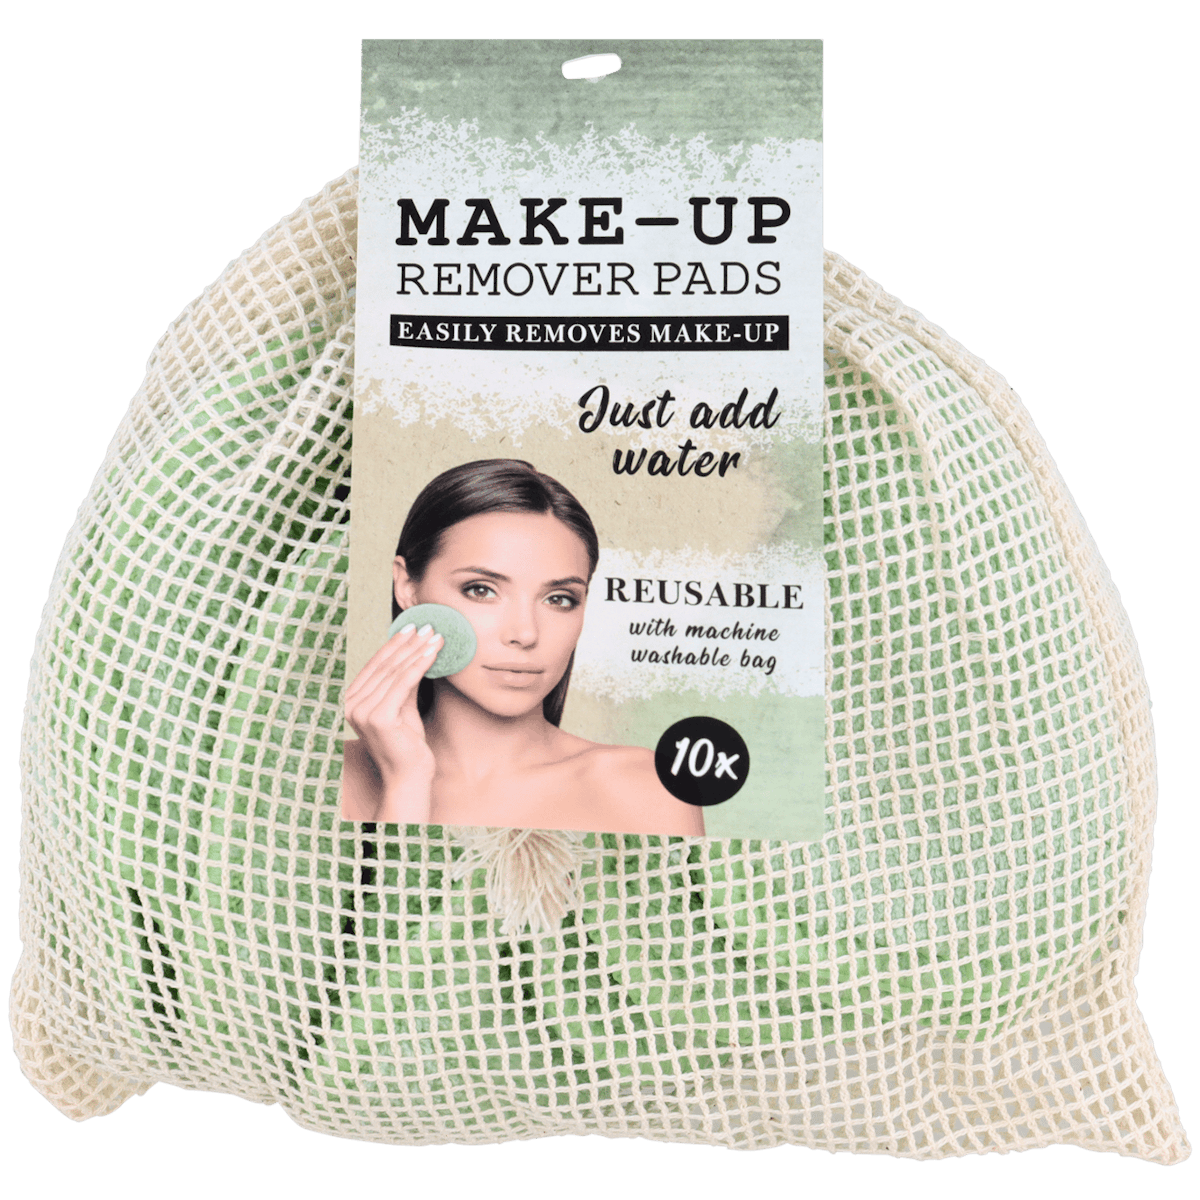 Make-up remover pads